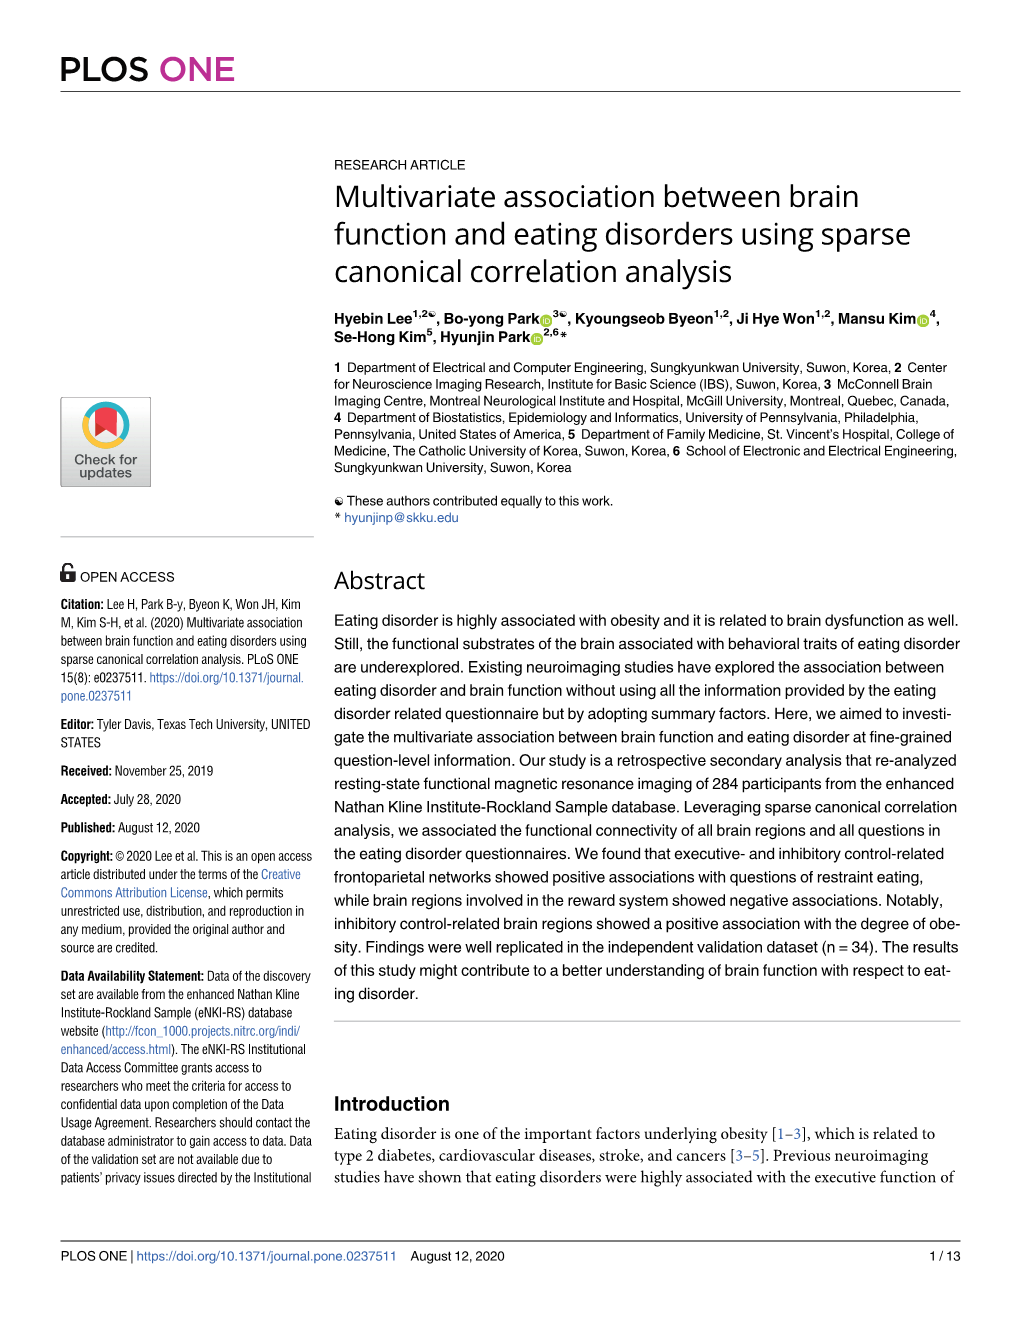 Multivariate Association Between Brain Function and Eating Disorders Using Sparse Canonical Correlation Analysis